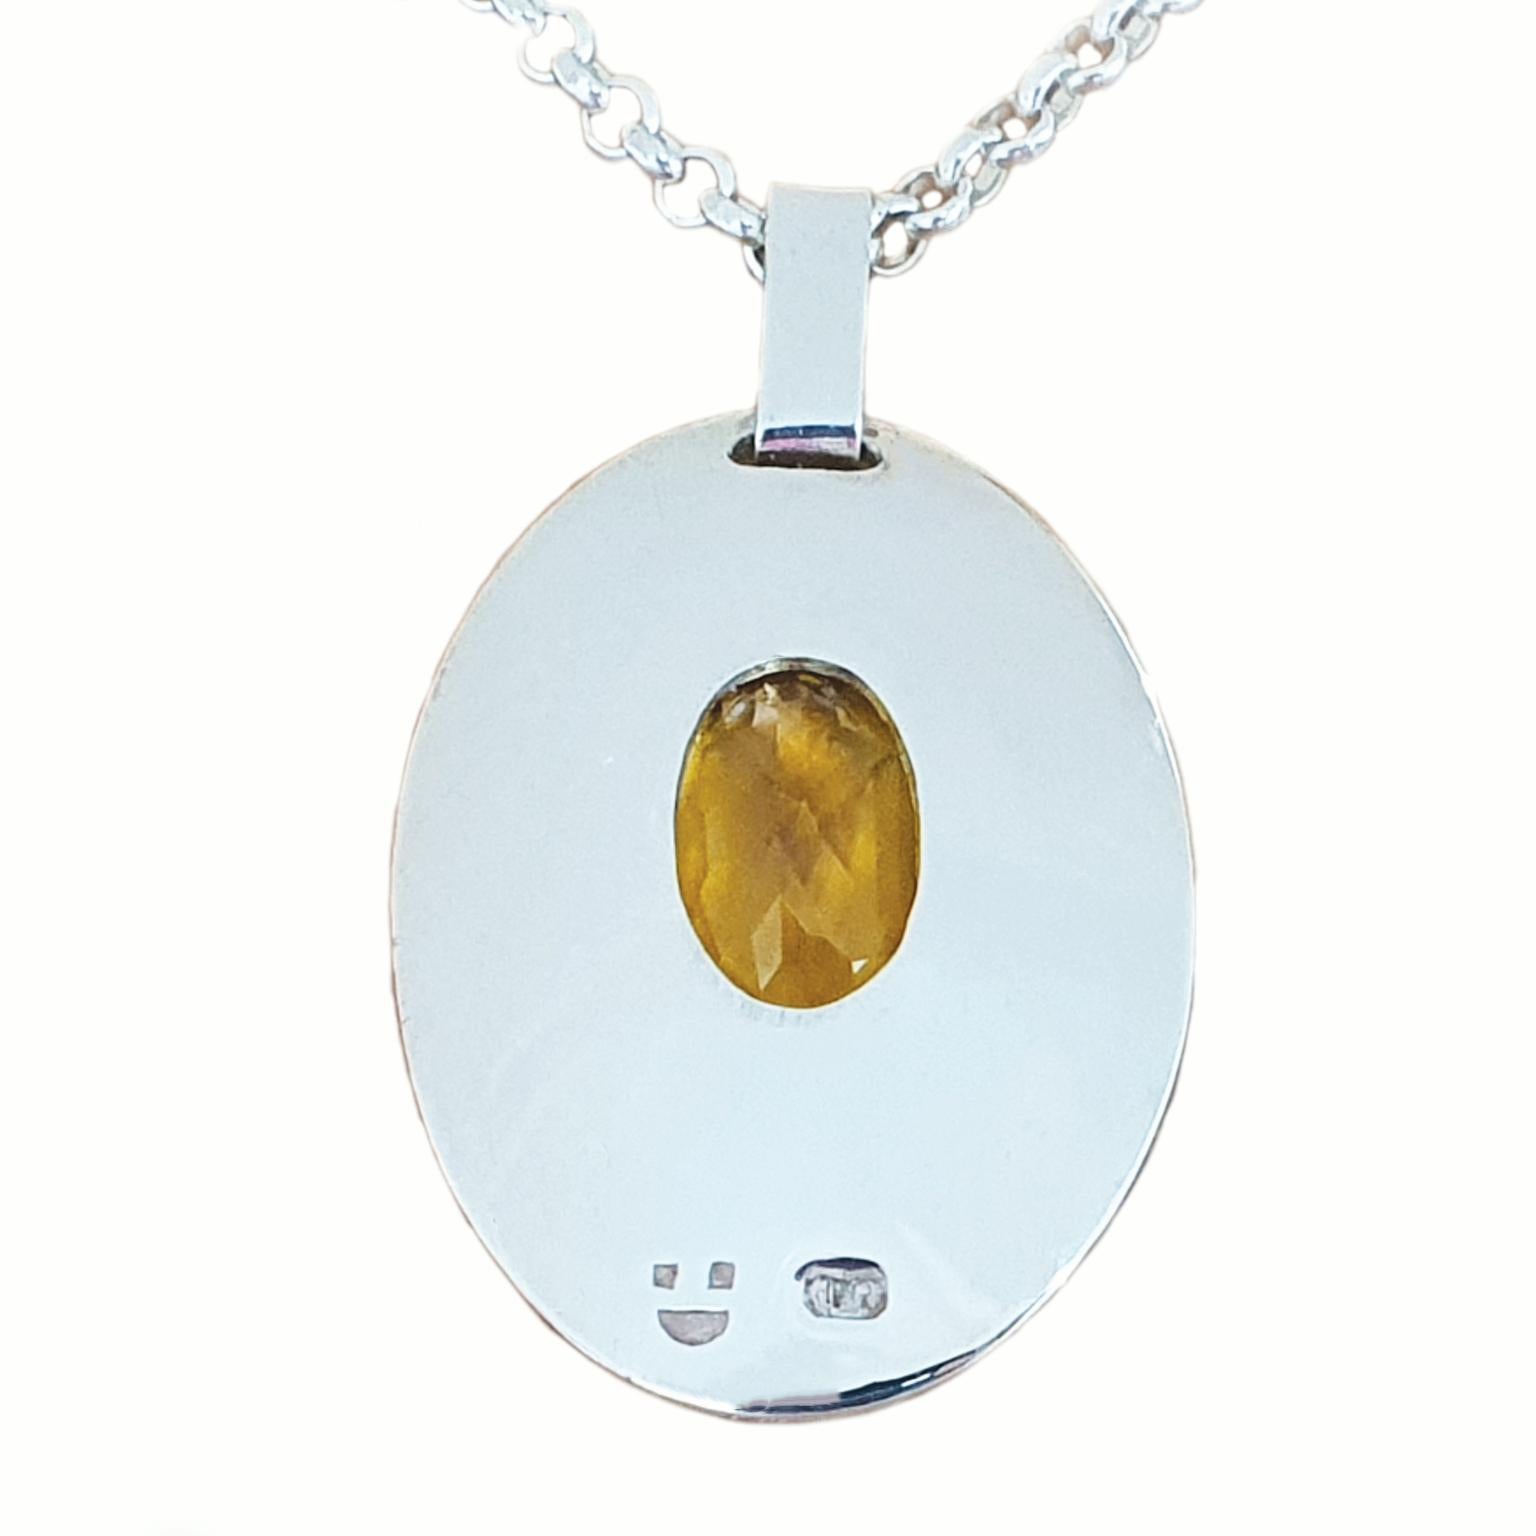 Paul Amey Hand Crafted Yellow Oval Pendant In New Condition For Sale In Tewantin, Queensland